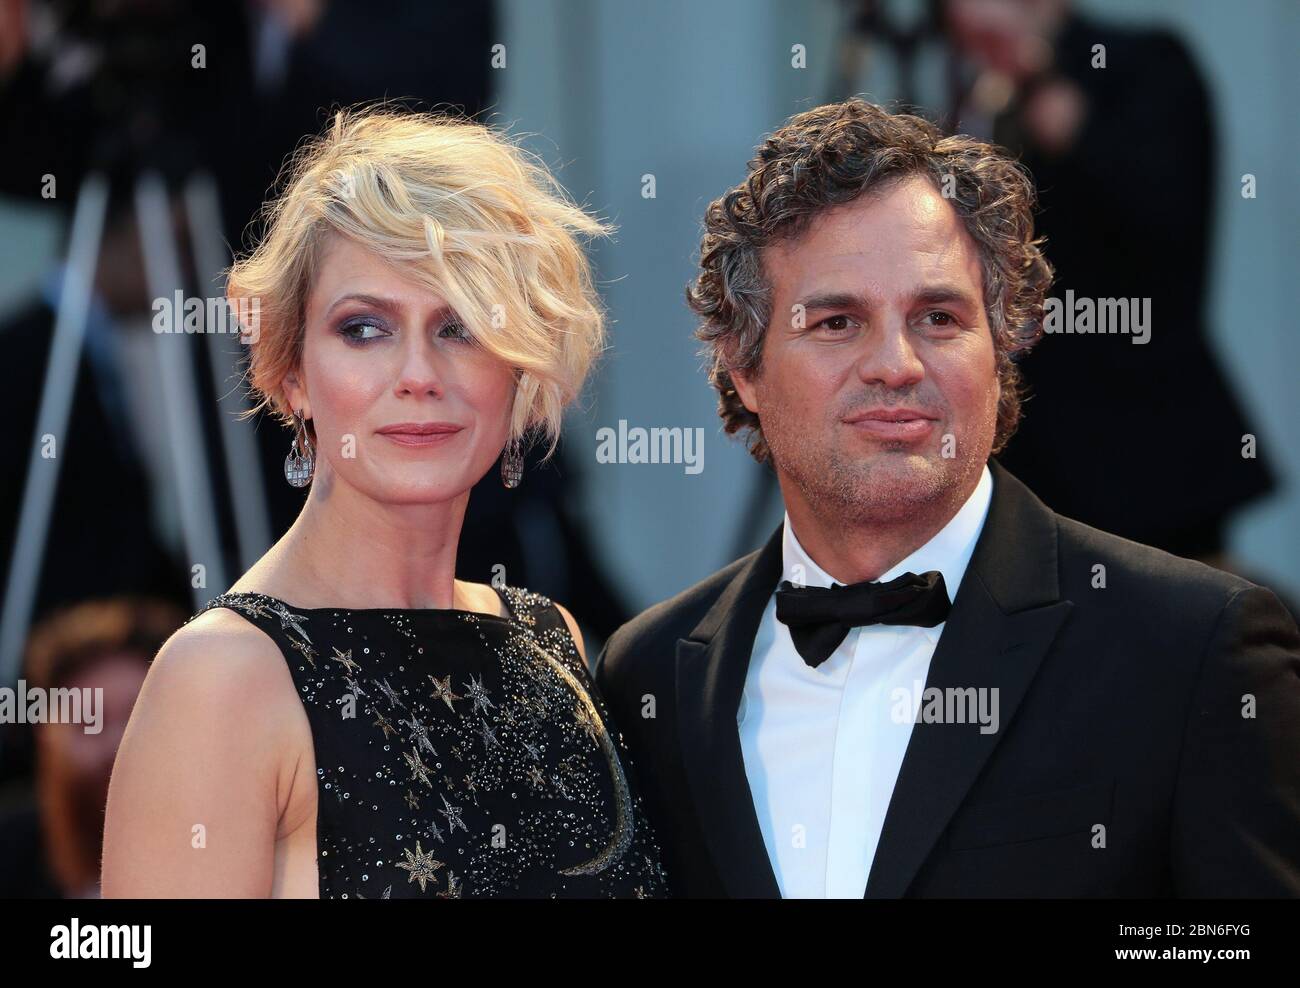 VENICE, ITALY - SEPTEMBER 03: Mark Ruffalo and Sunrise Coigney  attends the premiere of 'Spotlight' during the 72nd Venice Film Festival Stock Photo